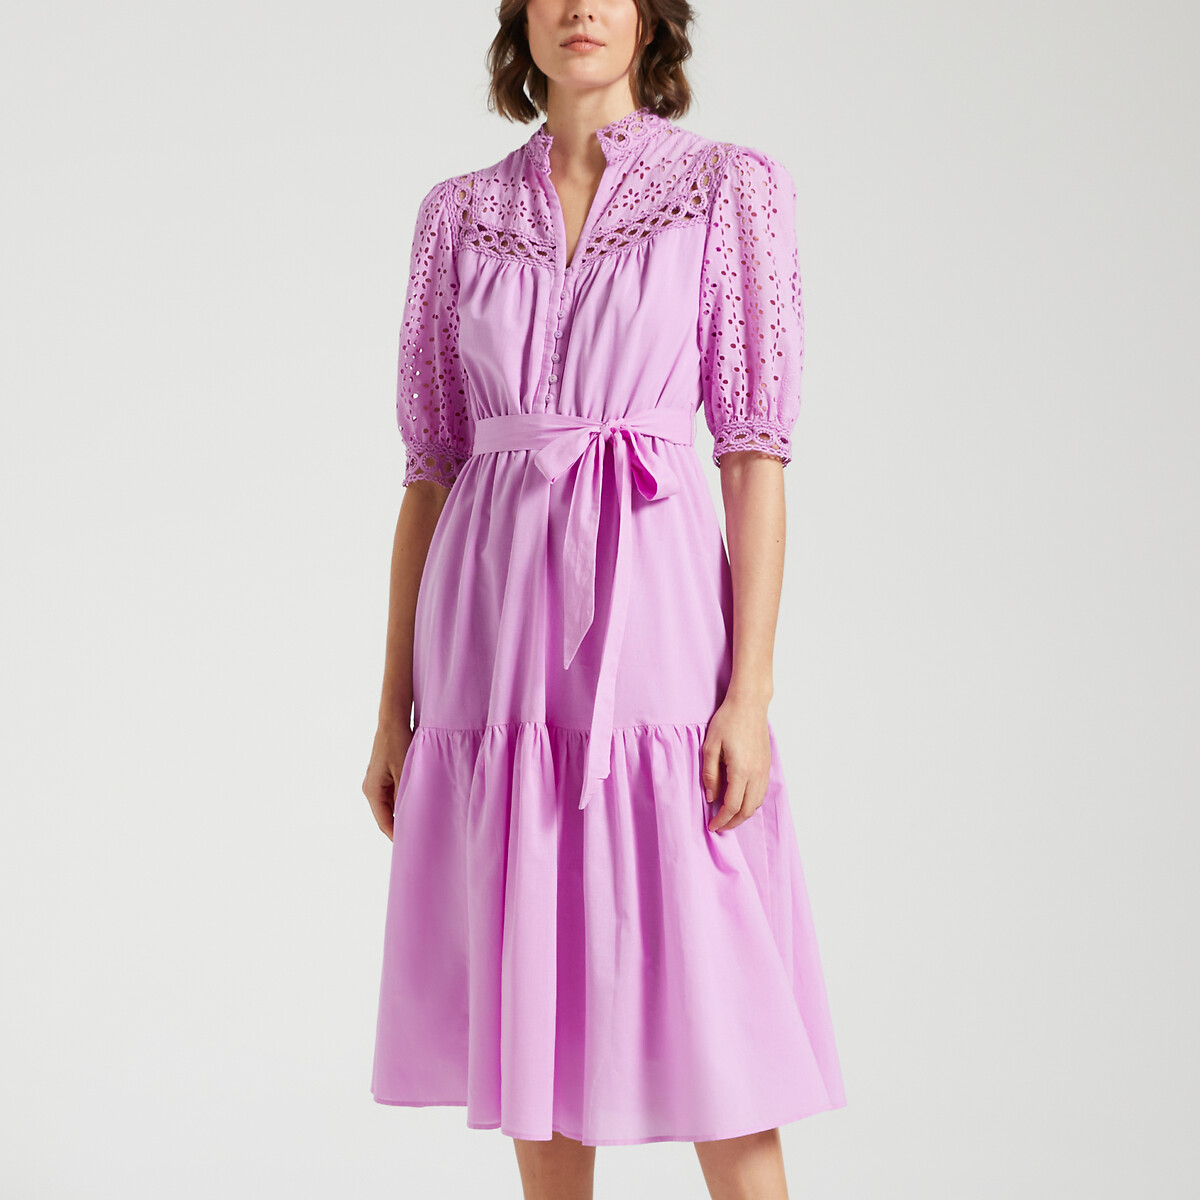 Image of Carla Broderie Anglaise Dress in Organic Cotton with 3/4 Length Sleeves